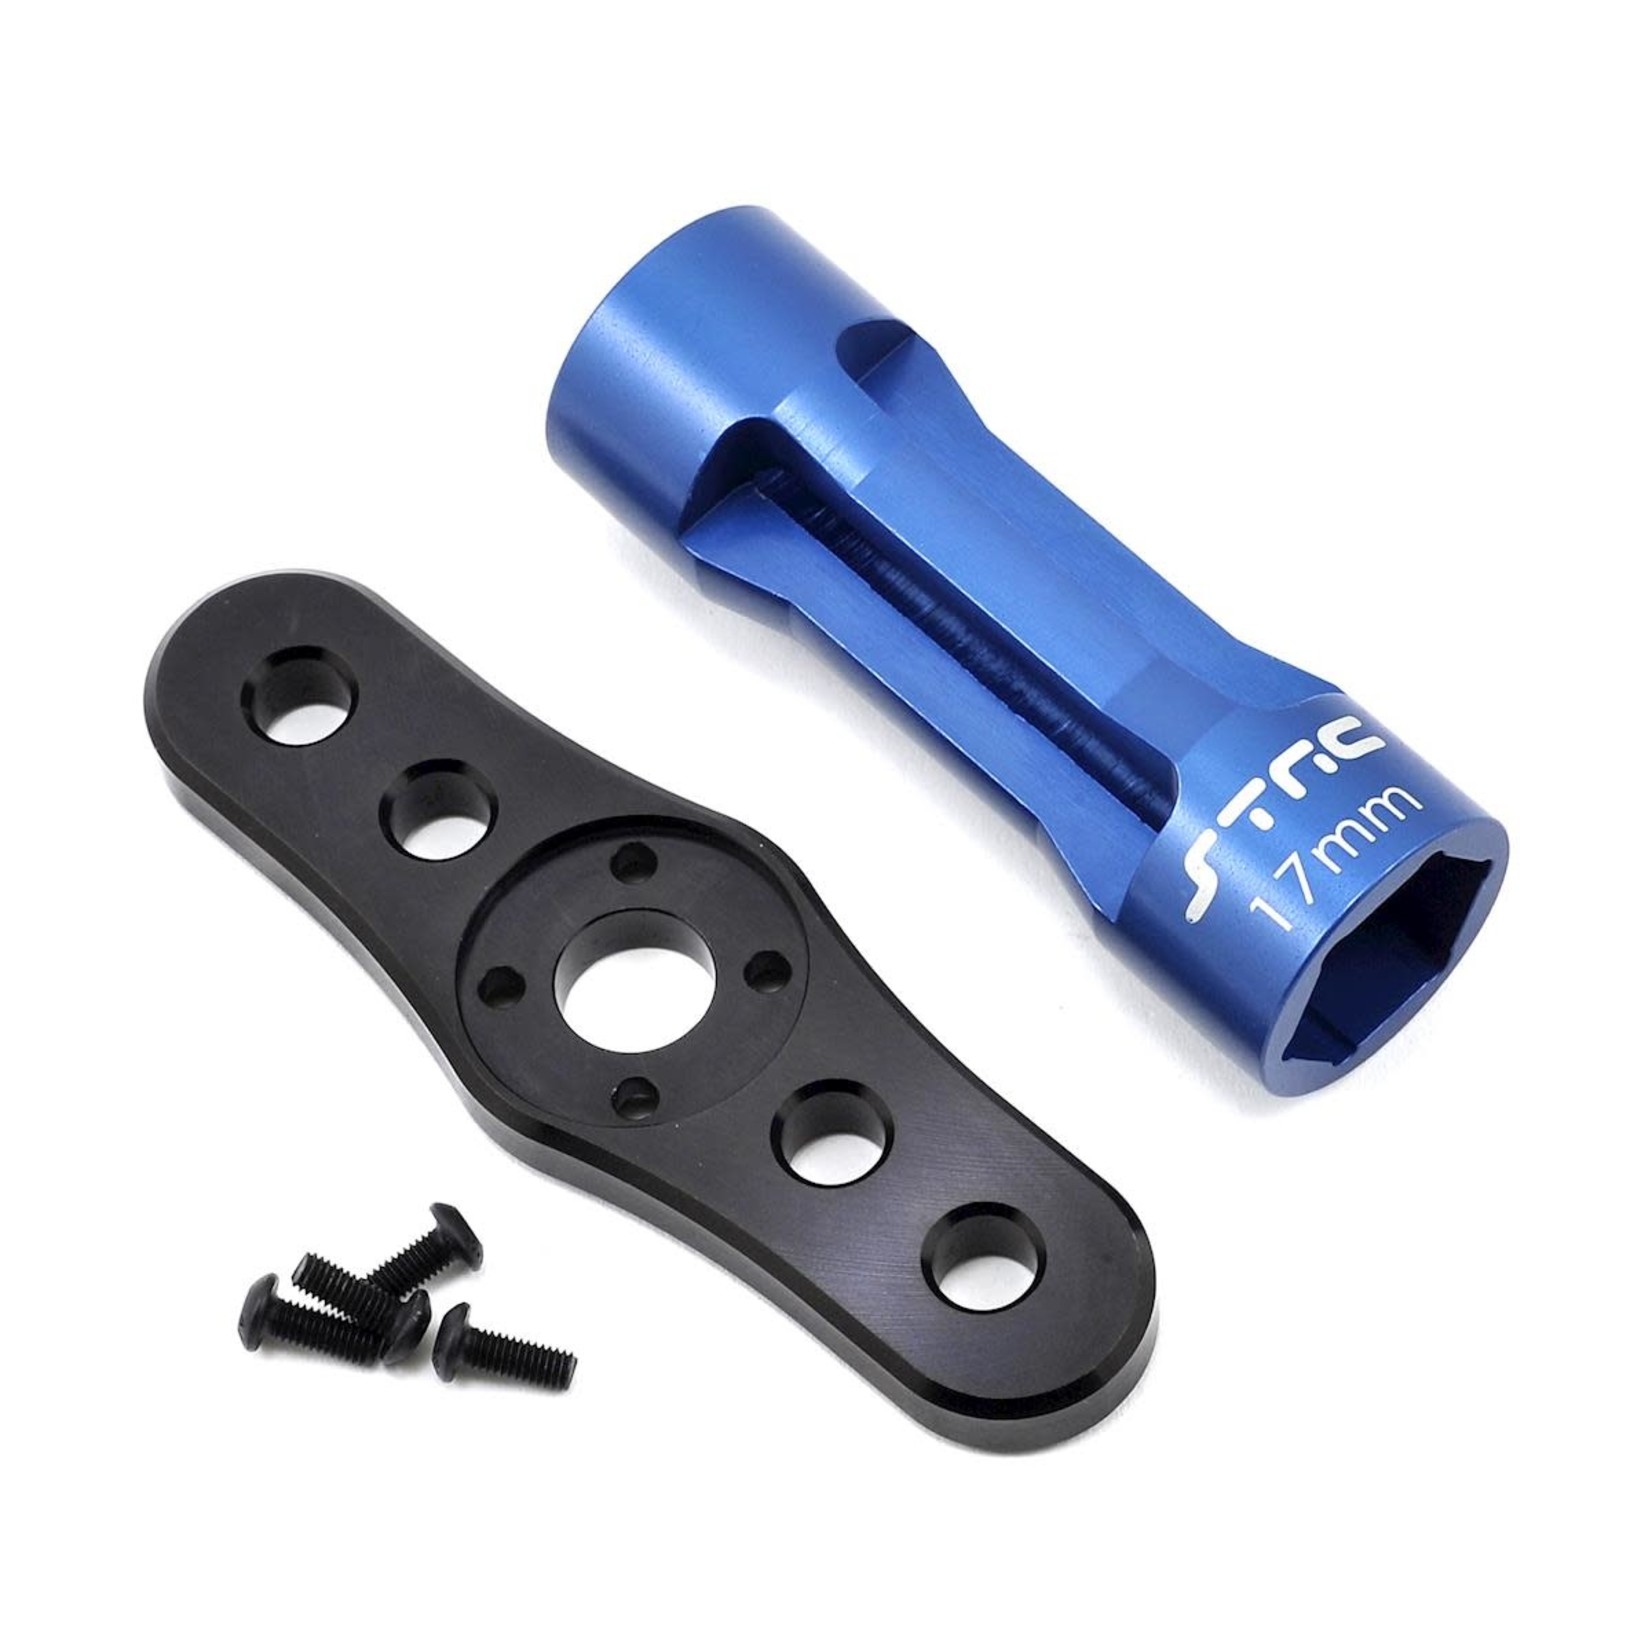 ST Racing Concepts ST Racing Concepts 17mm Light Weight T-Handle Wheel Wrench (Black/Blue) #STRA17BKB